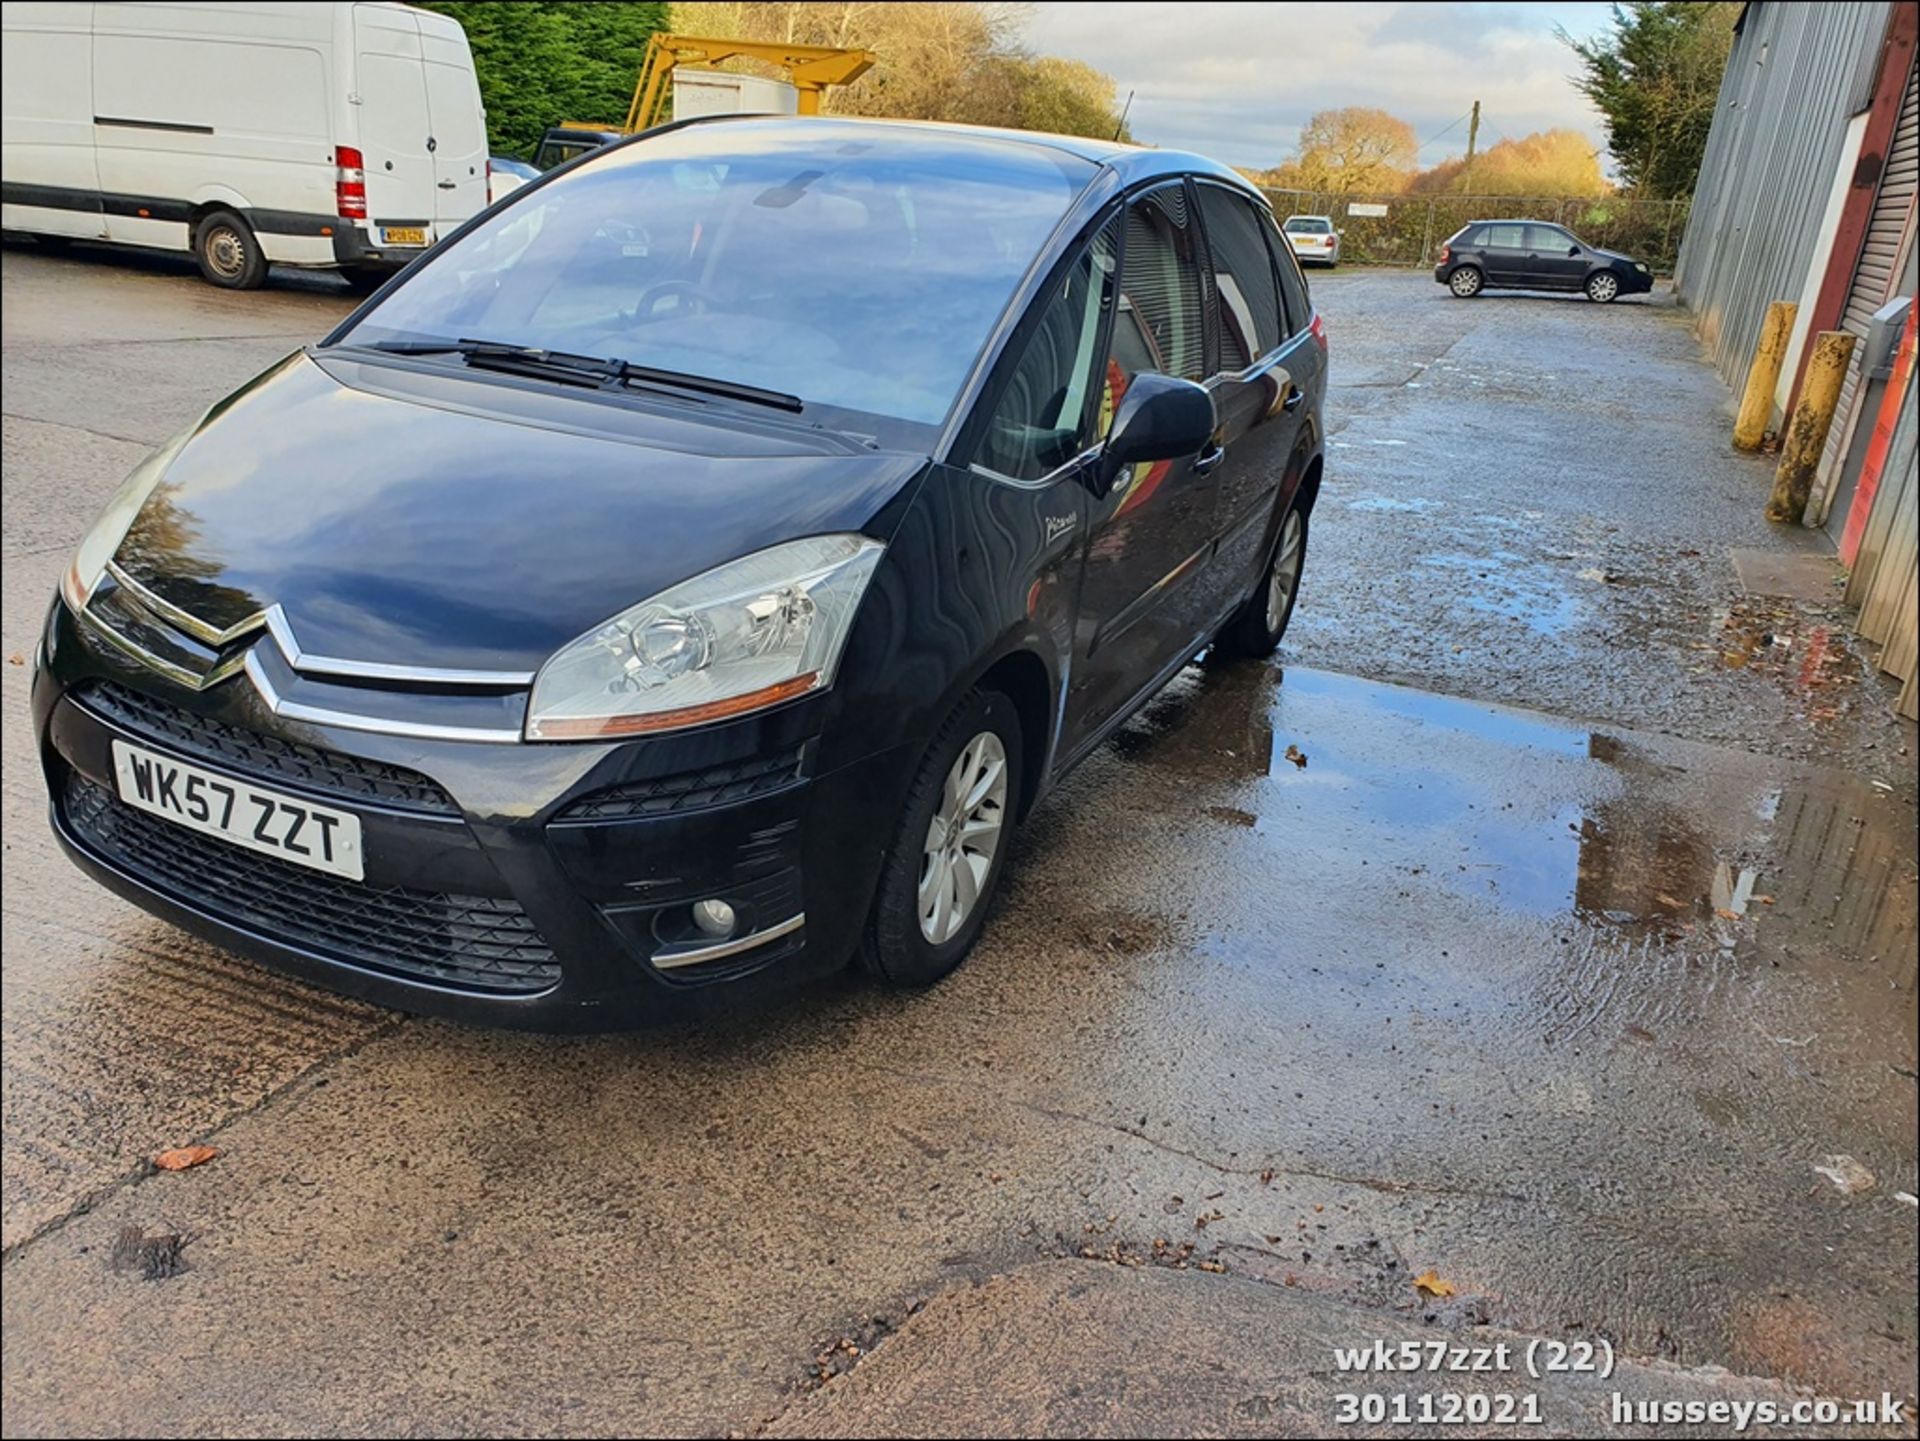 07/57 CITROEN C4 PICASSO 5 EXCL HDI EGS - 1560cc 5dr MPV (Black, 120k) - Image 22 of 29